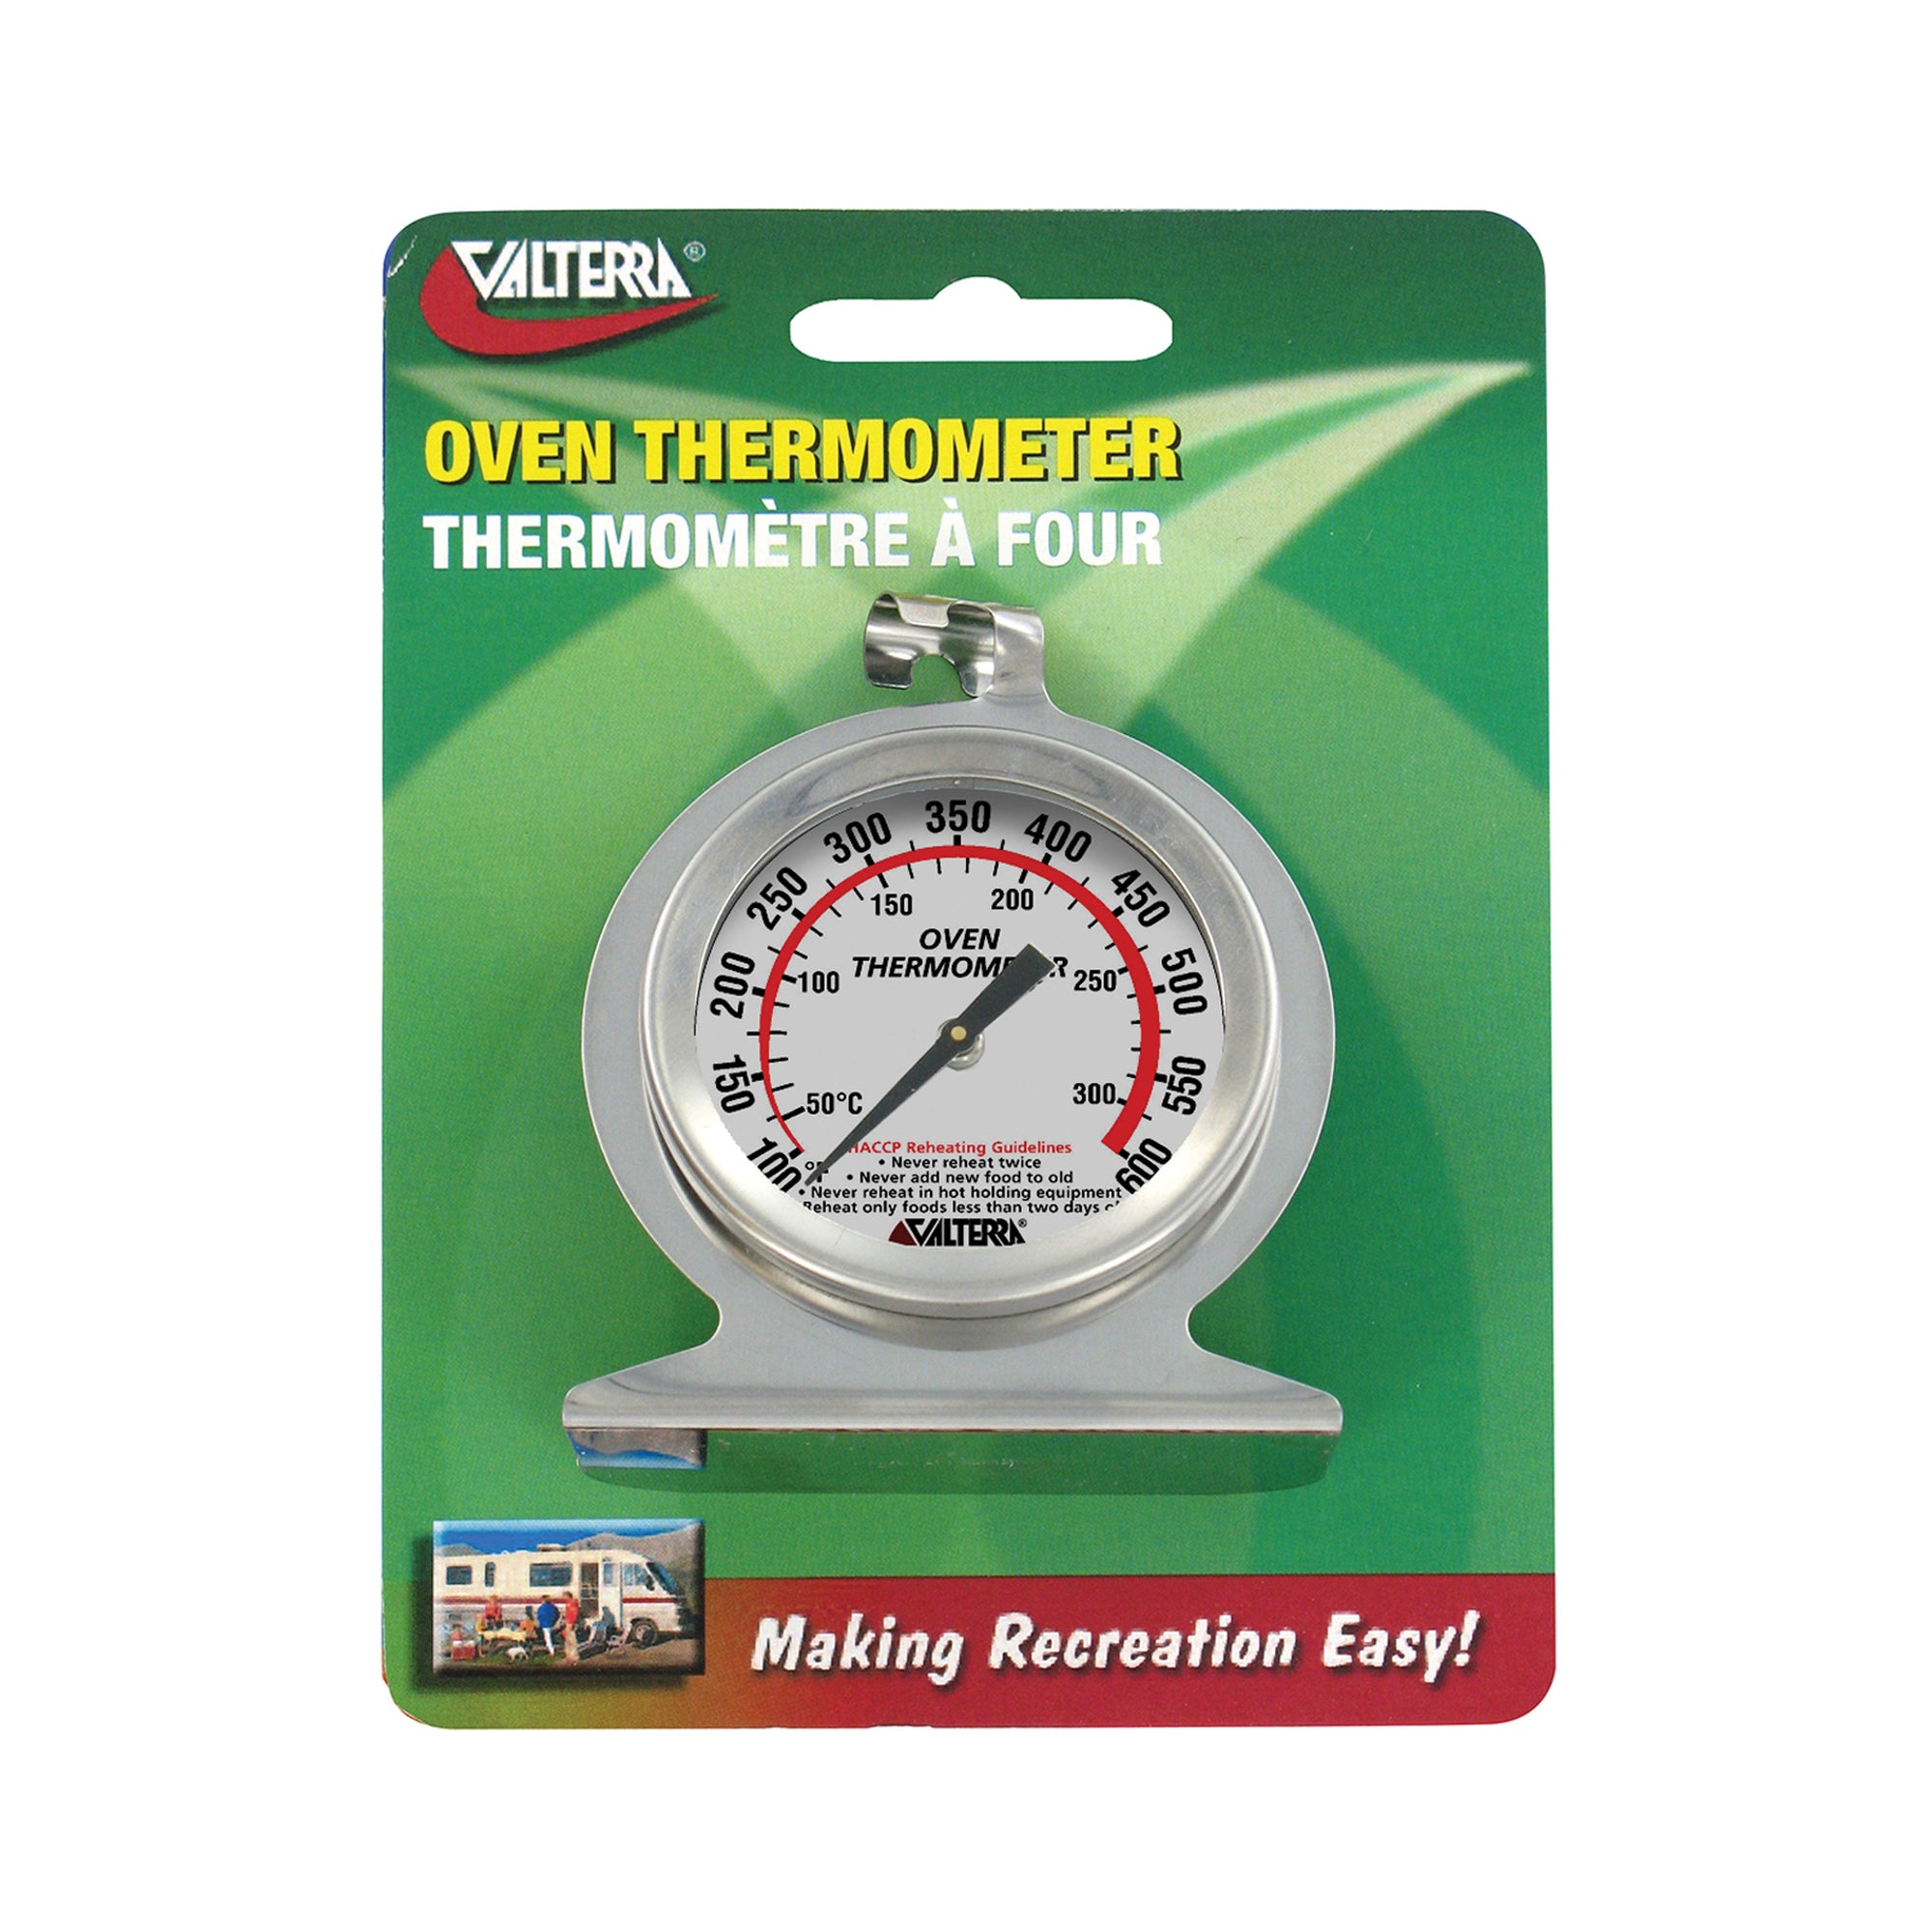 Valterra A10-3200VP Oven Thermometer